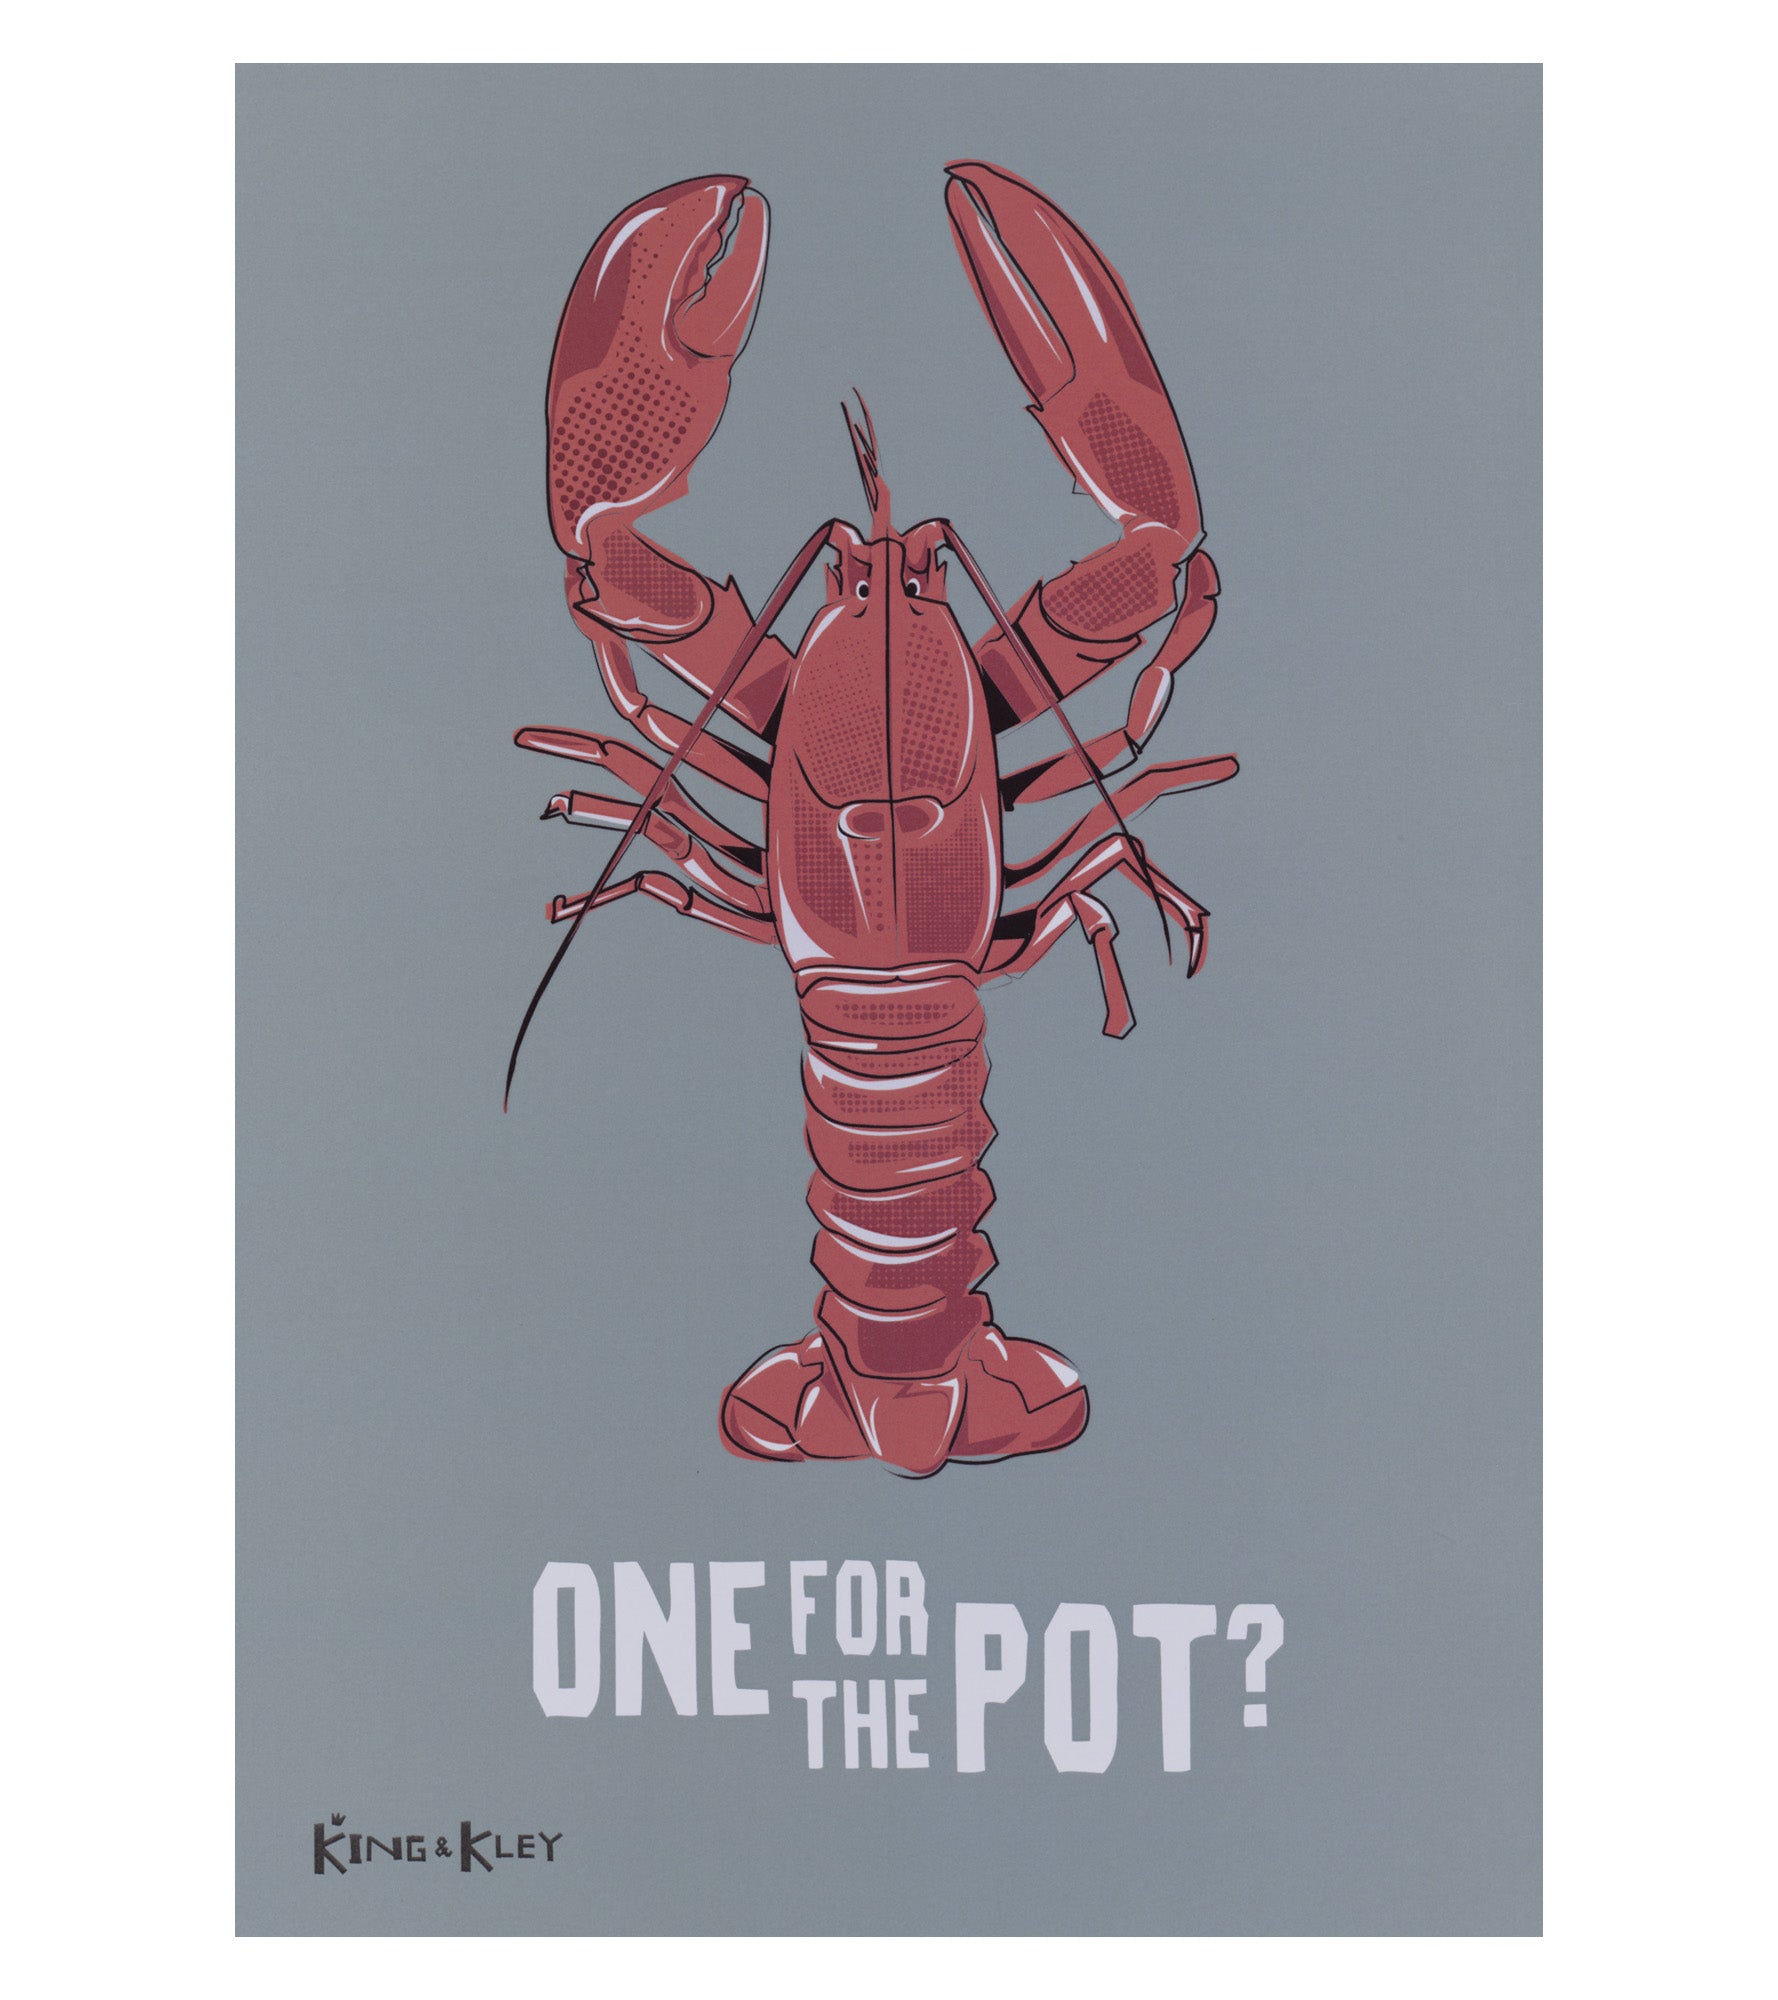 One for the Pot? - A3 Print by King & Kley